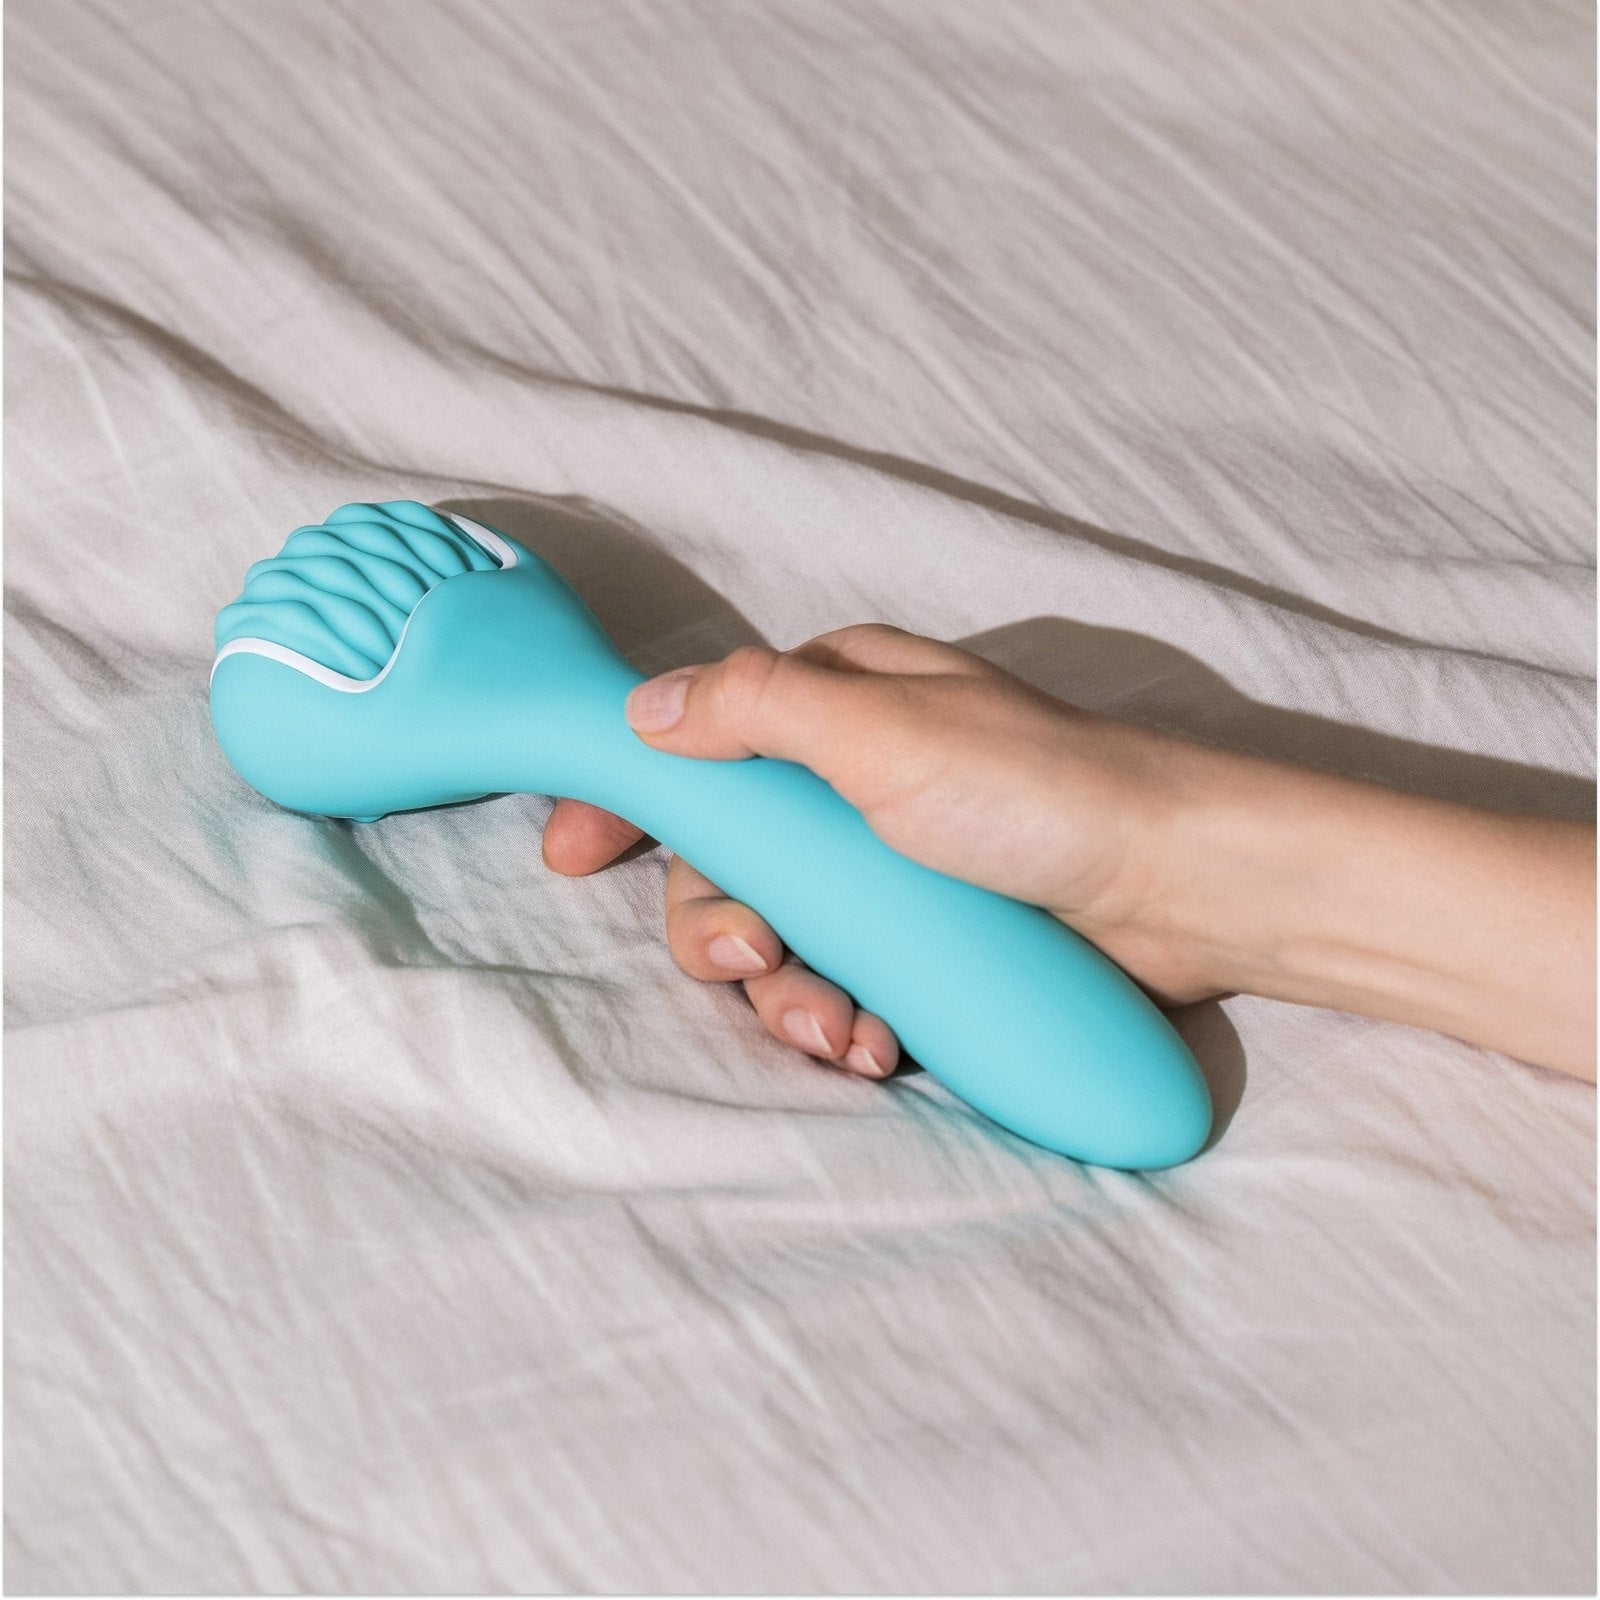 Bewitch'd - Vibrating Wand Massager - Cordless & Rechargeable